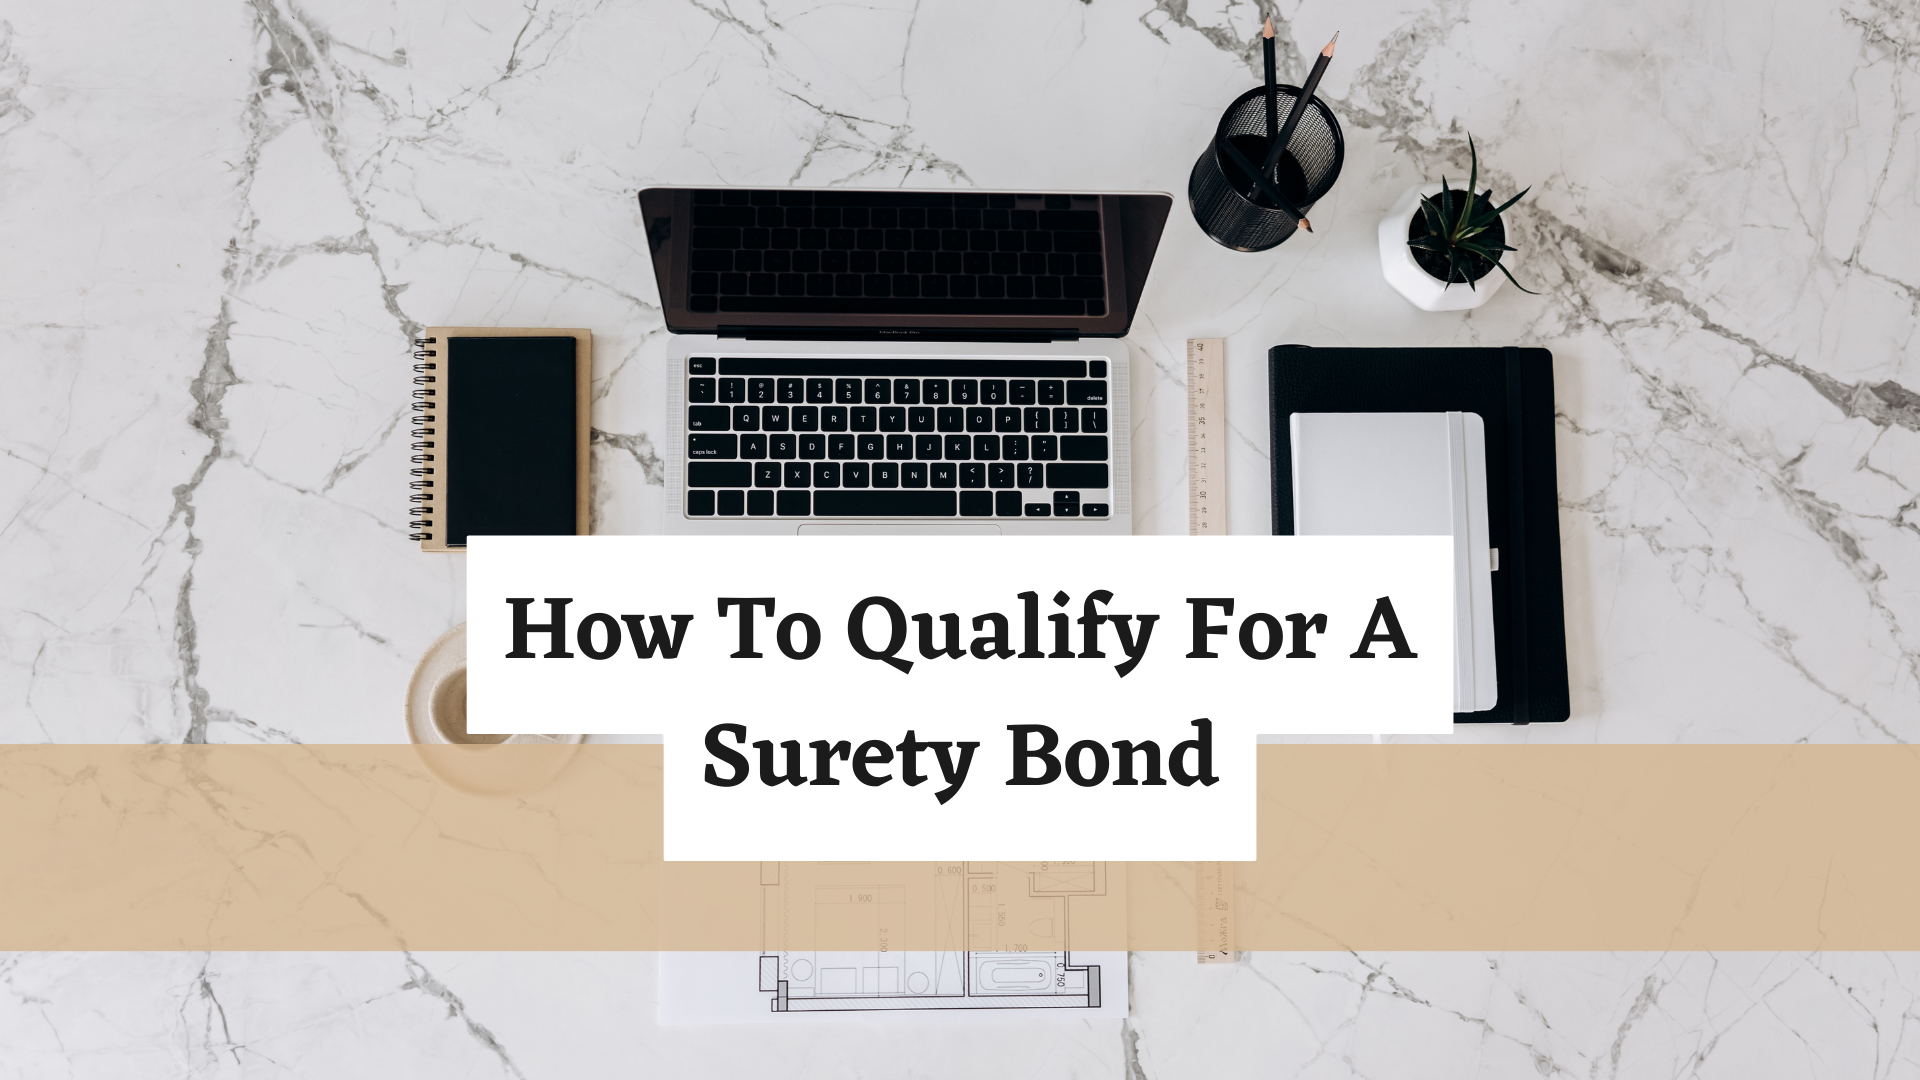 How To Qualify For A Surety Bond